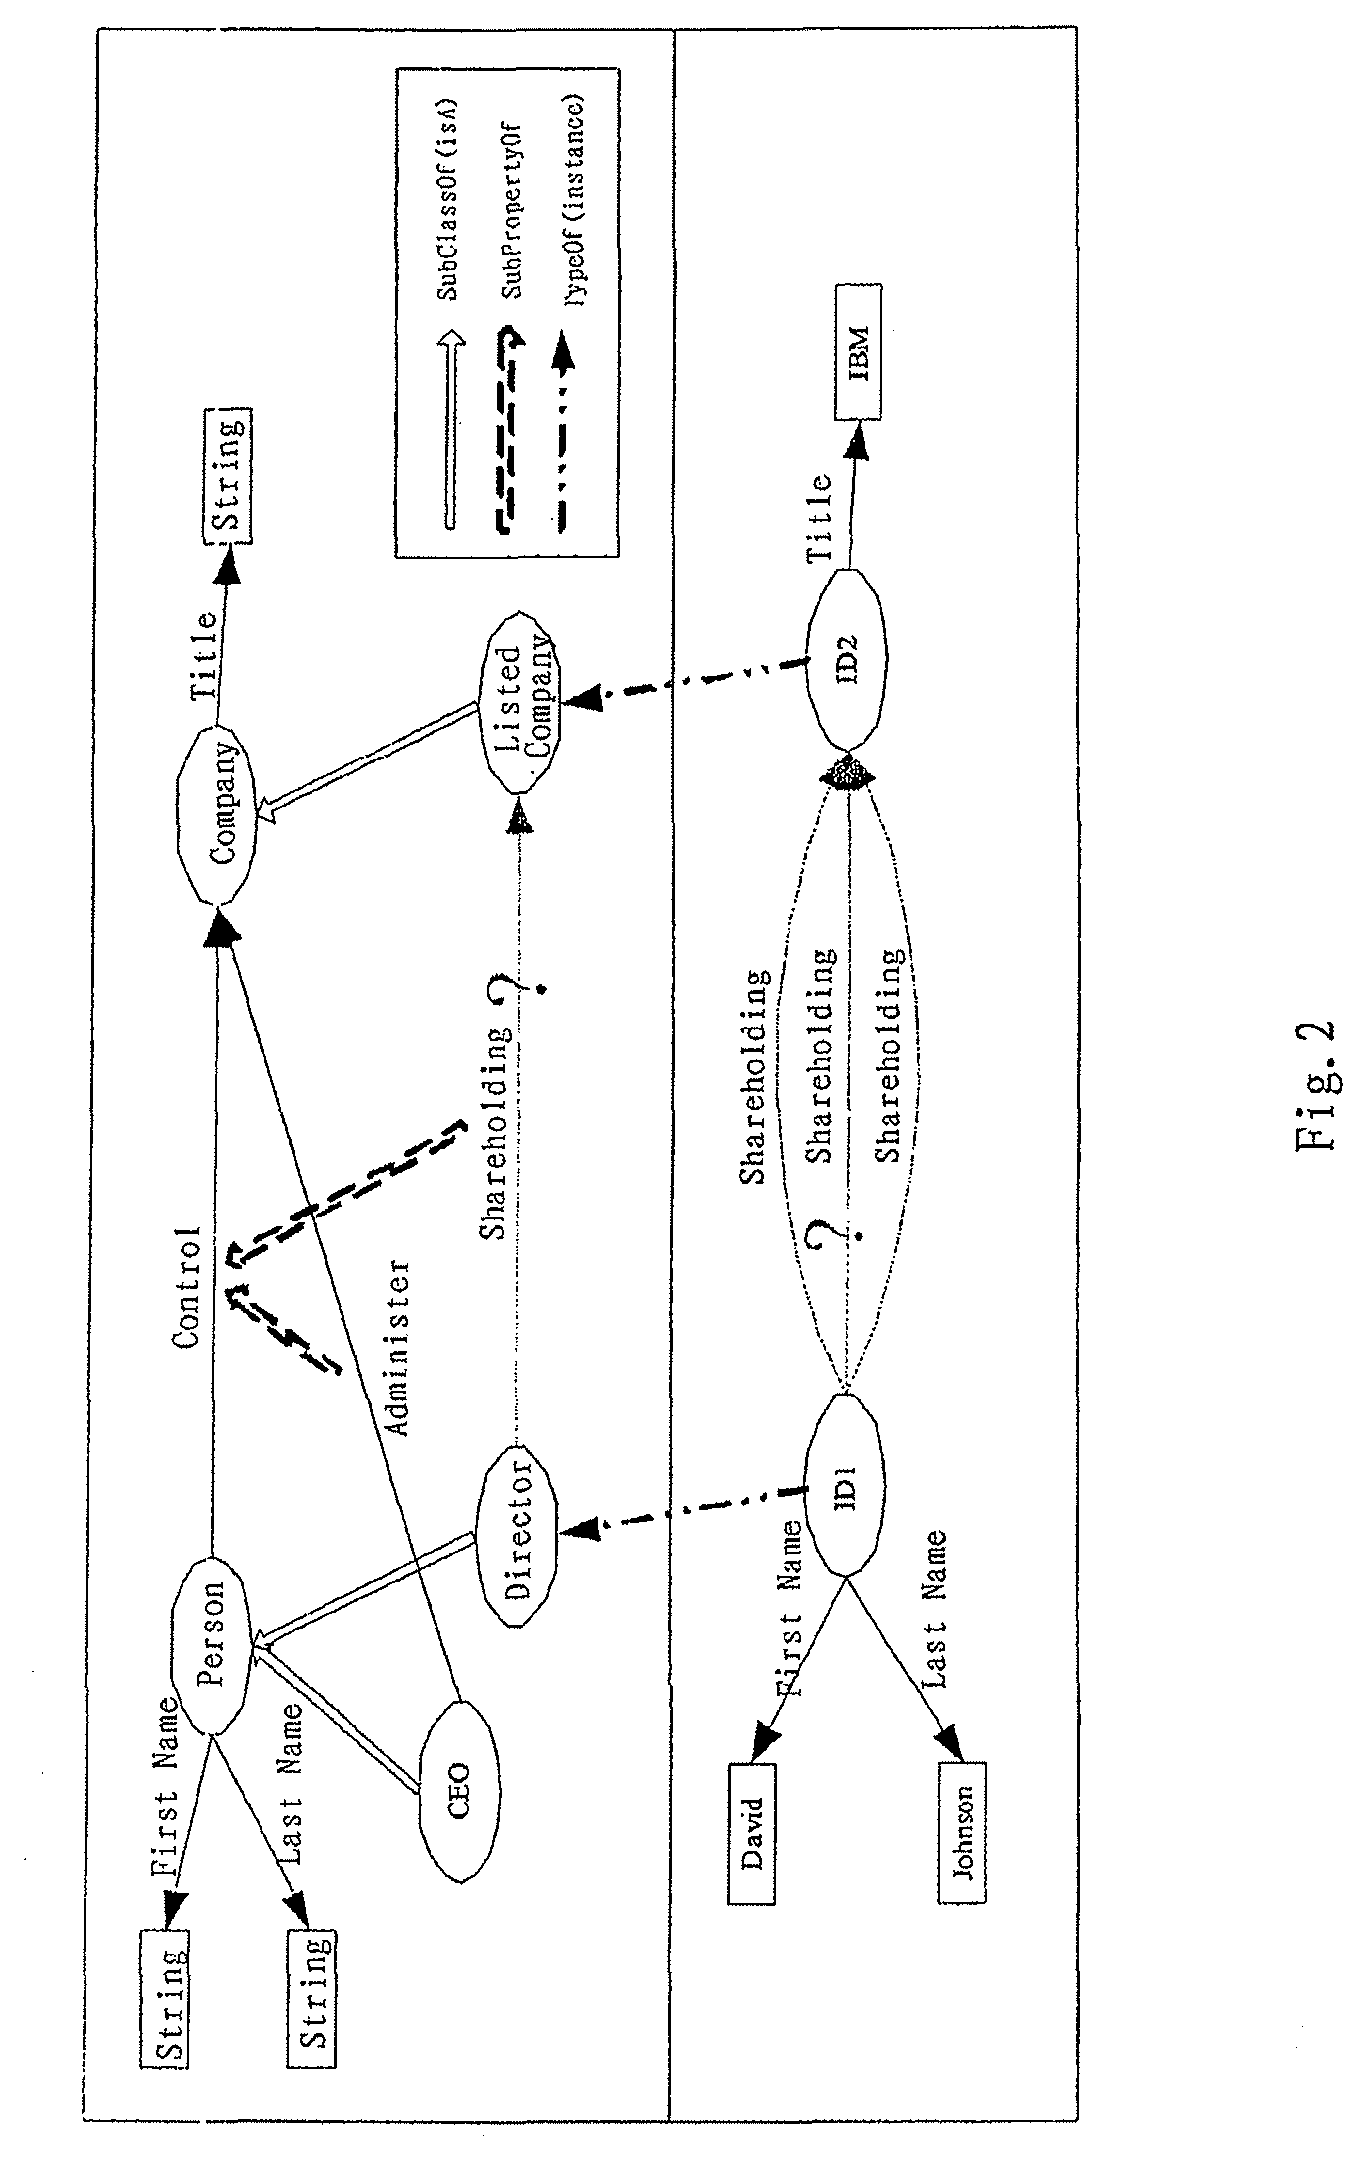 System and method for automatically refining ontology within specific context